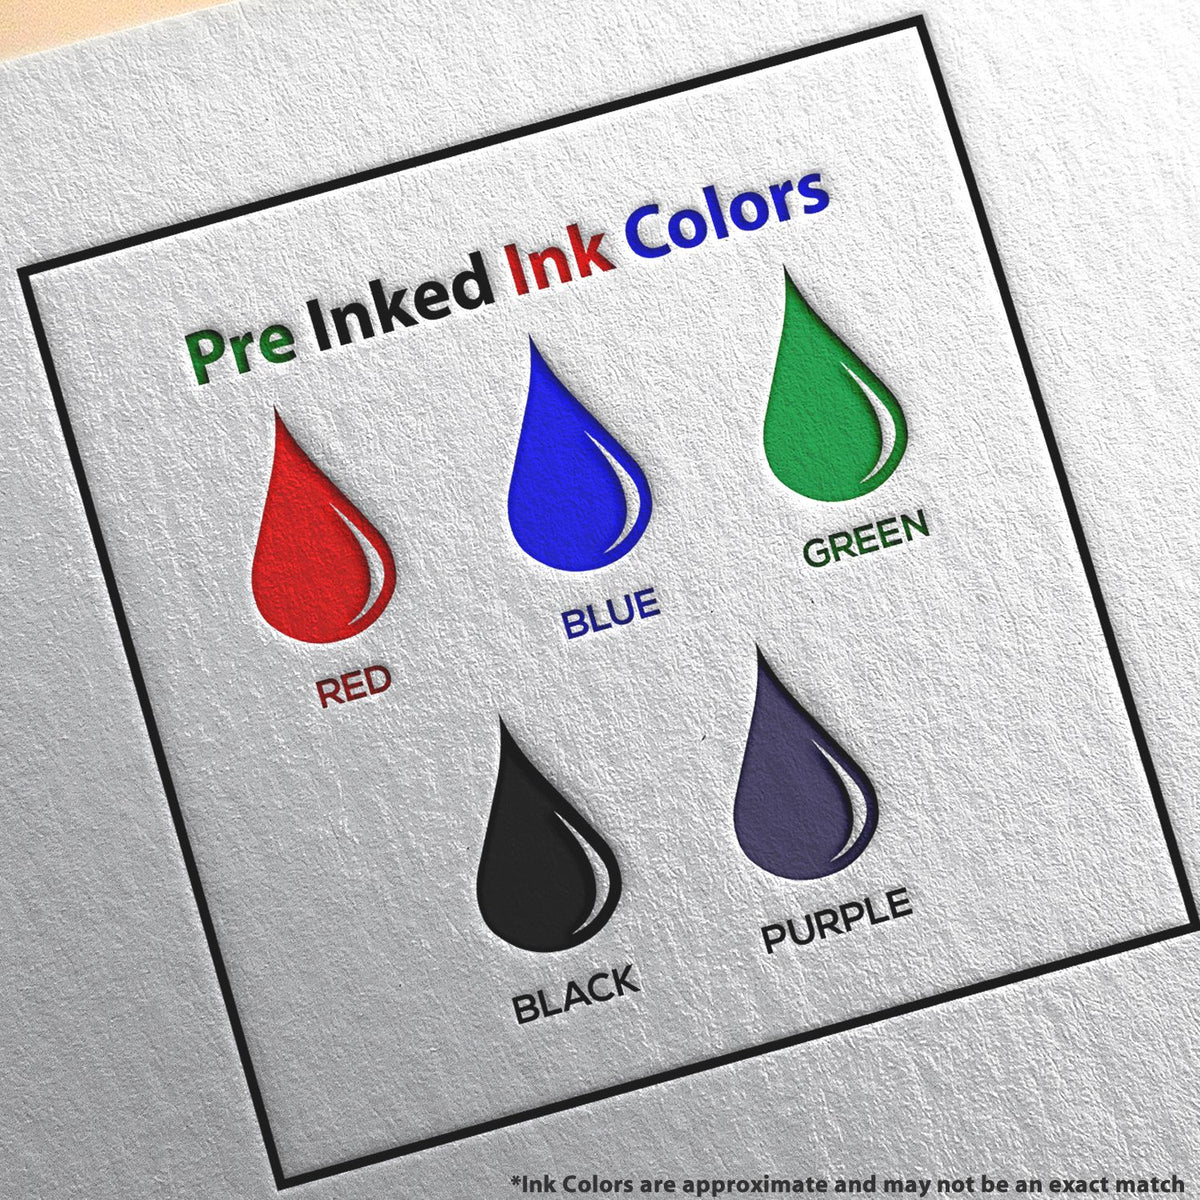 A picture showing the different ink colors or hues available for the Slim Pre-Inked New Mexico Landscape Architect Seal Stamp product.